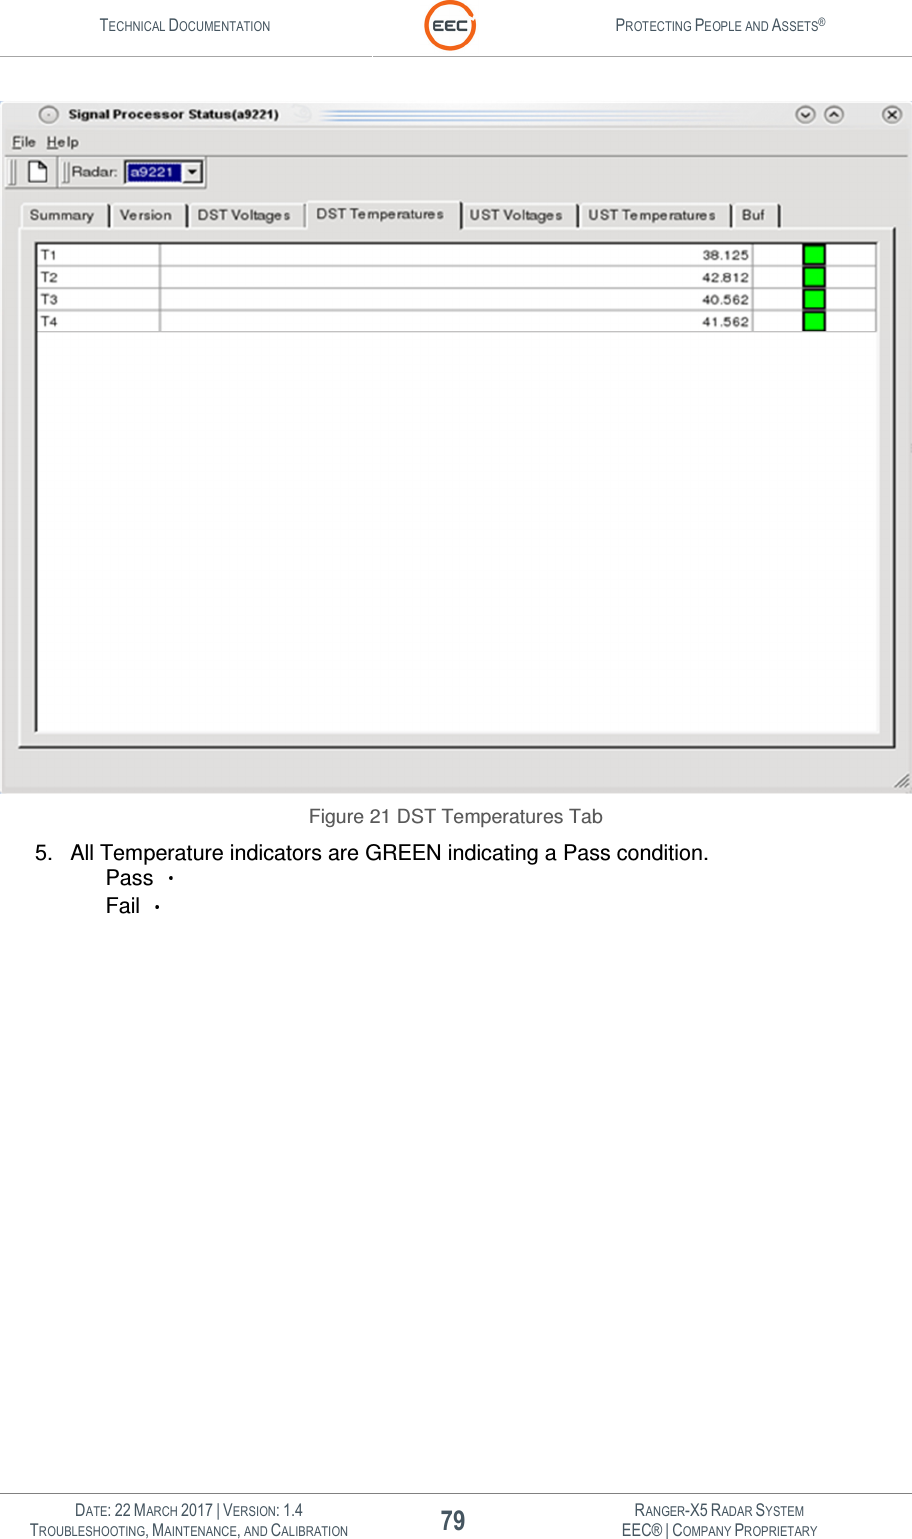 TECHNICAL DOCUMENTATION  PROTECTING PEOPLE AND ASSETS®   DATE: 22 MARCH 2017 | VERSION: 1.4 79 RANGER-X5 RADAR SYSTEM TROUBLESHOOTING, MAINTENANCE, AND CALIBRATION EEC® | COMPANY PROPRIETARY   Figure 21 DST Temperatures Tab 5.  All Temperature indicators are GREEN indicating a Pass condition.   Pass    Fail    